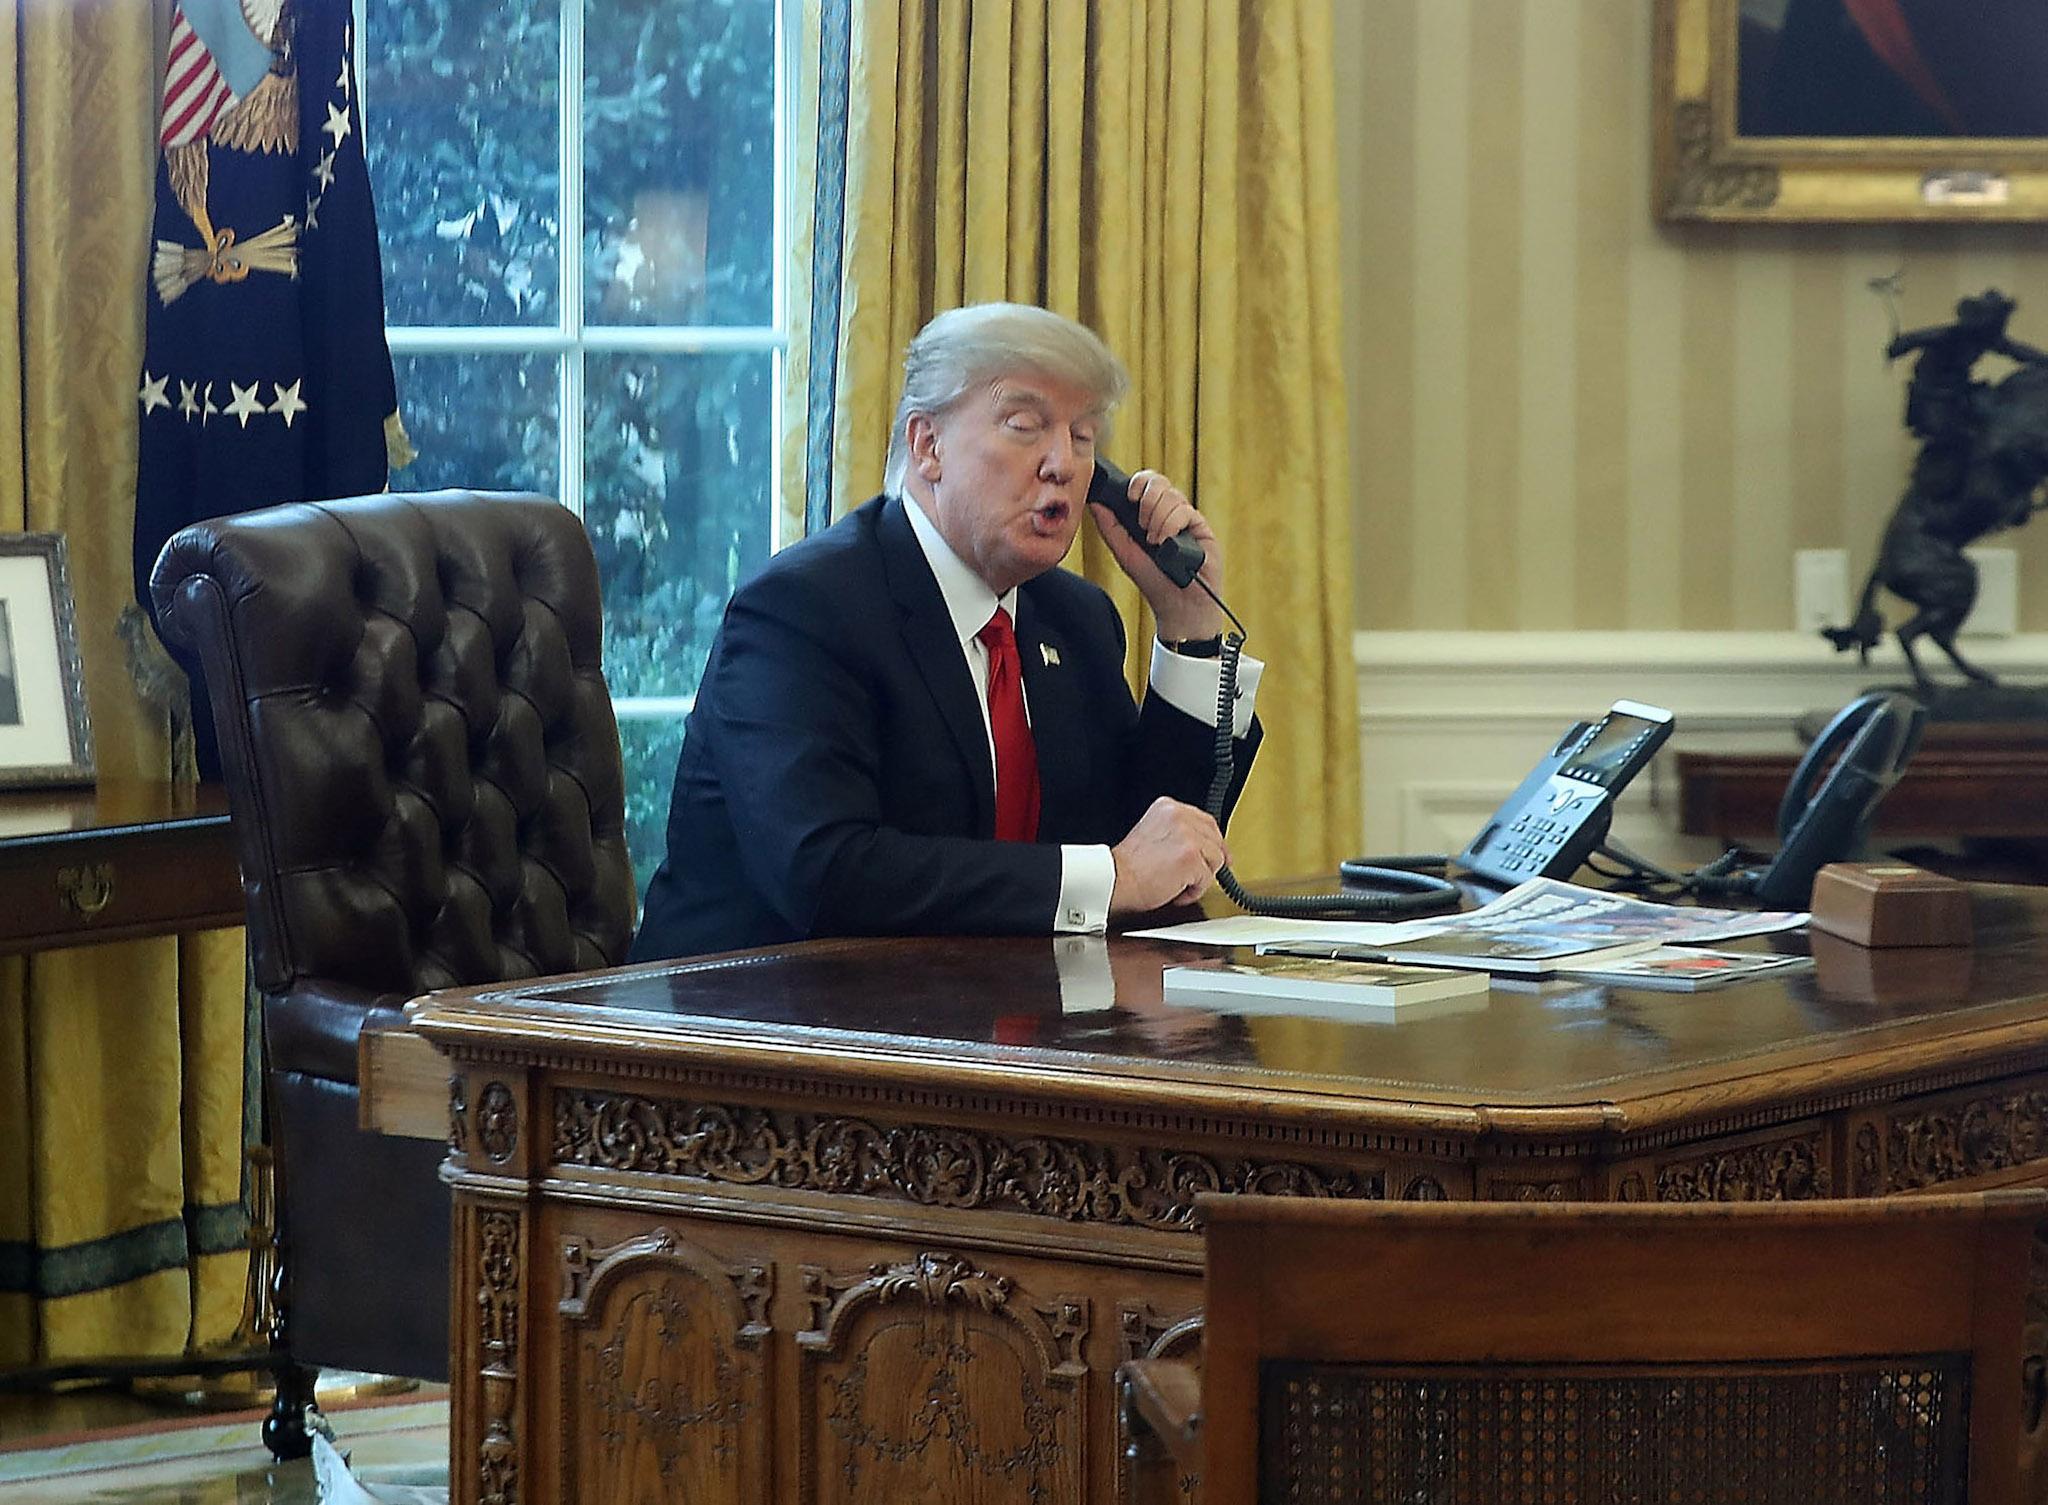 President Donald Trump is seen through a window speaking on the phone with King of Saudi Arabia, Salman bin Abd al-Aziz Al Saud, in the Oval Office of the White House